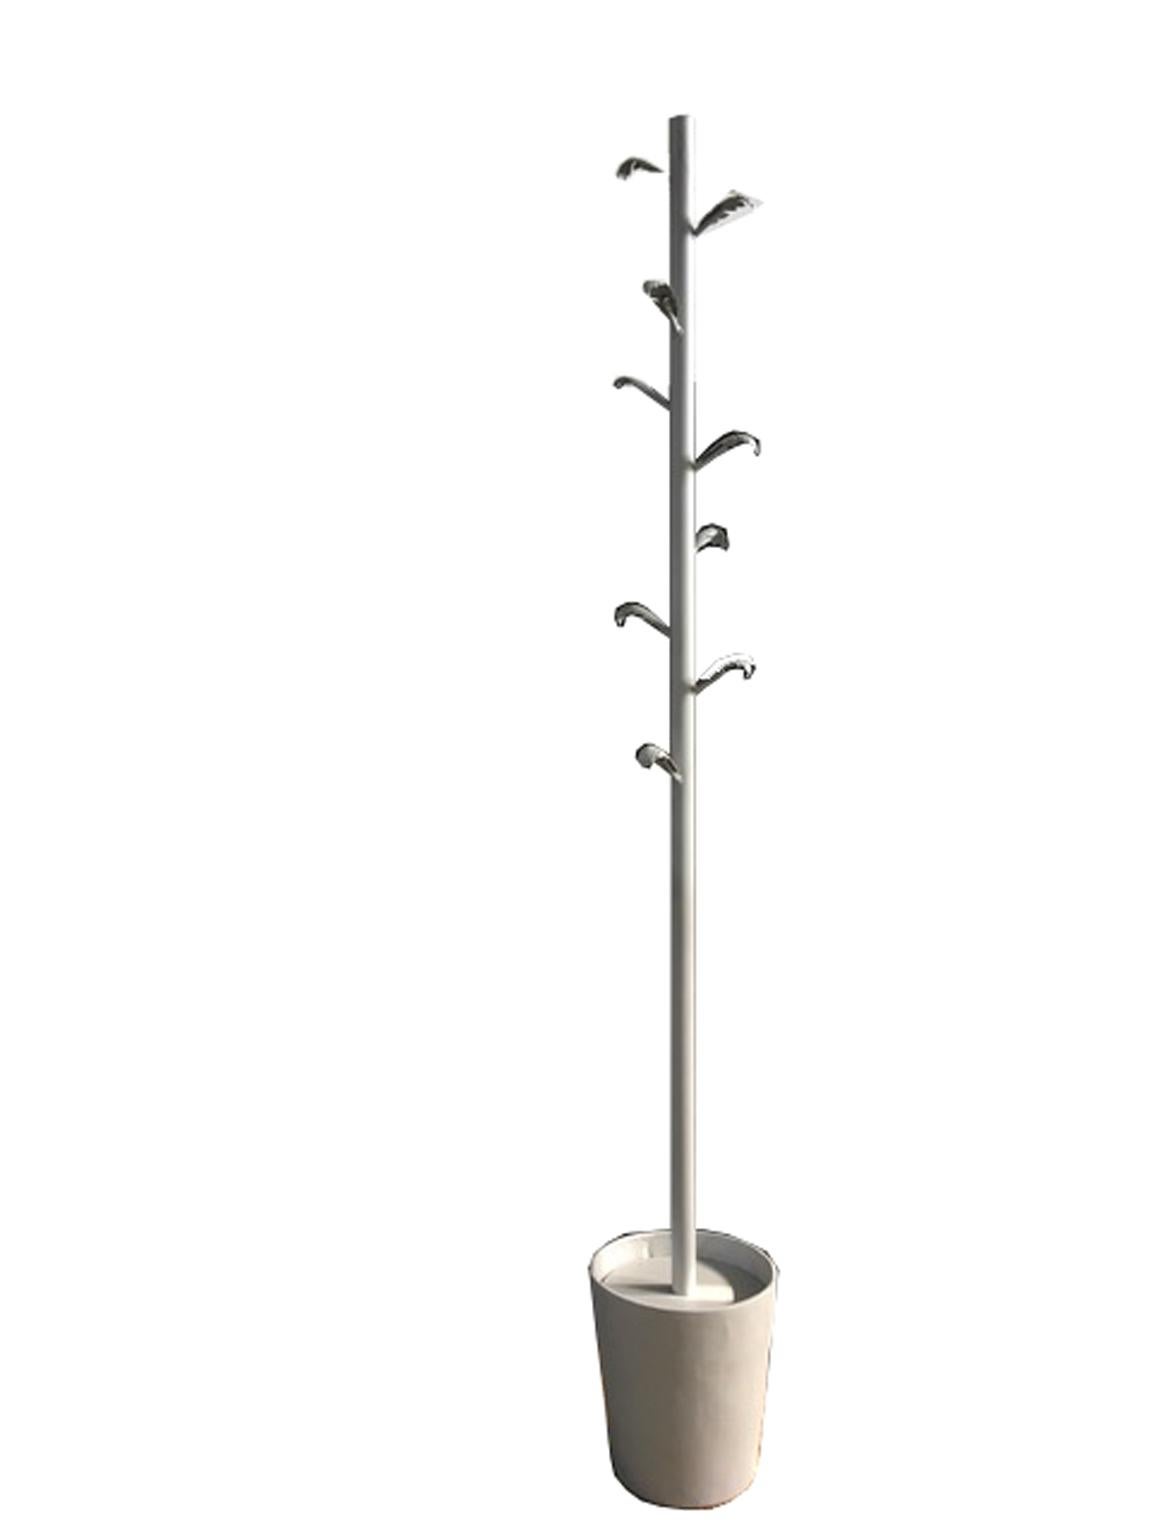 Ugo la Pietra is a very eclectic Italian artist and architect; this is an abstract sculpture cast in iron and aluminum that reproduces the imagine of a tree and that becomes a clothes hangers.

N. 15 multiples existing

